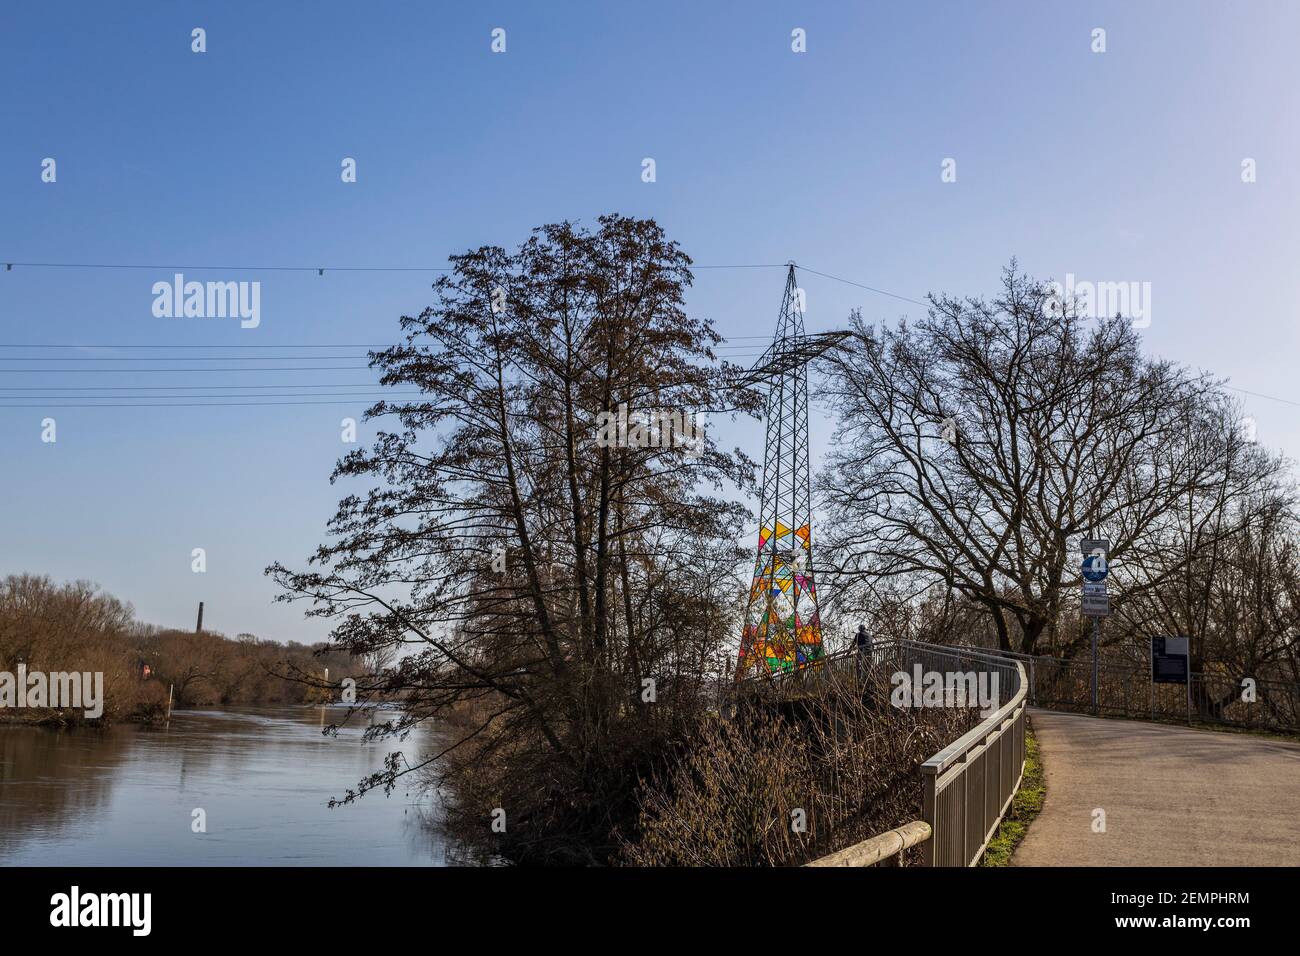 Leuchtturm, lighthouse, electricity pylon with colourful plexiglass panels designed by A. Hwang, J. Hae-Ryan and P. Chung-Ki, in Essen, Germany Stock Photo